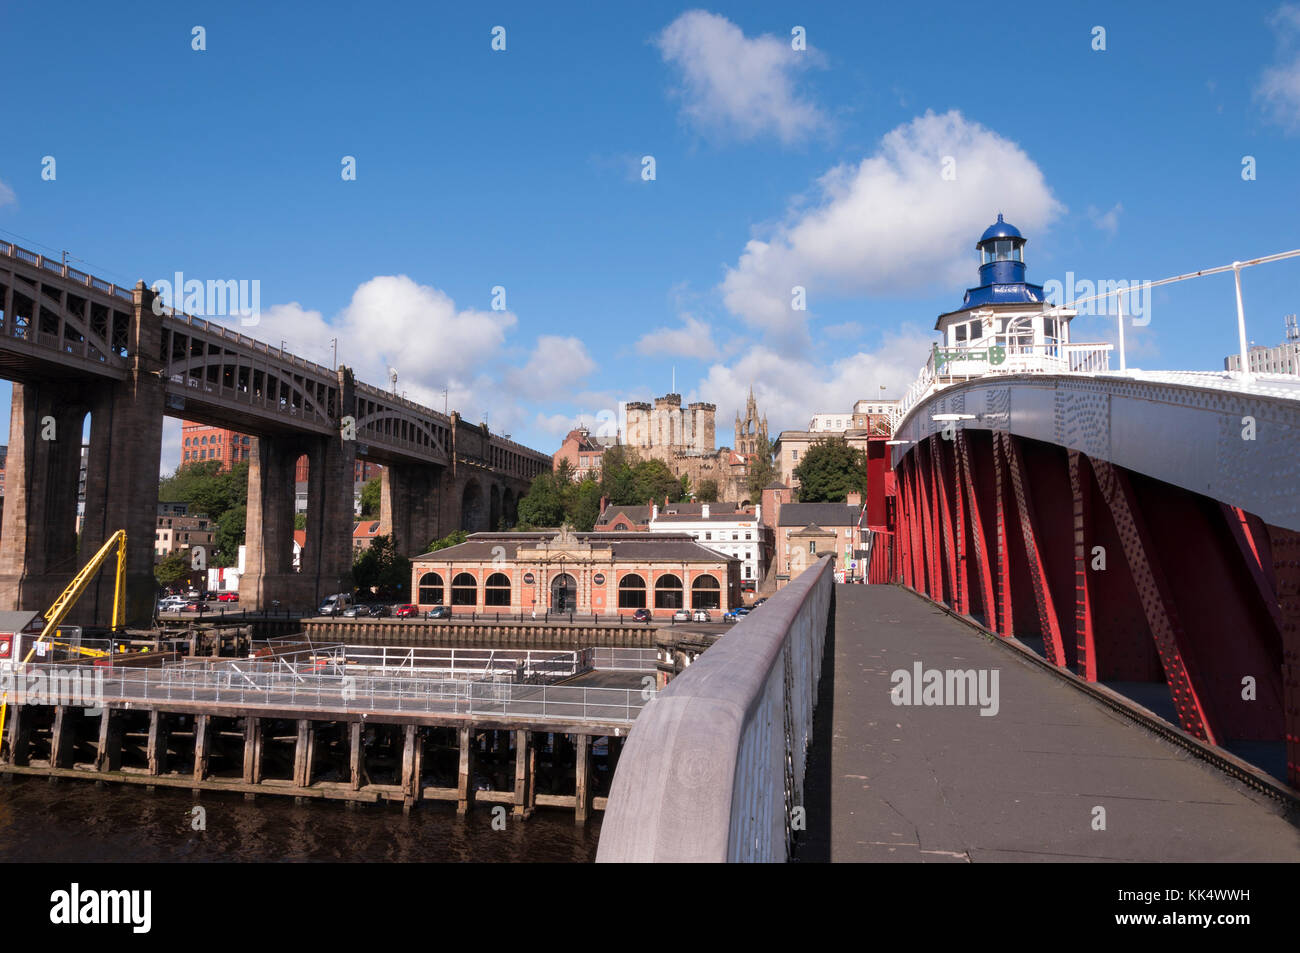 Looking towards the historic Newcastle Keep from the Swing bridge on the Gateshead side of the river Tyne, in North East England. Stock Photo